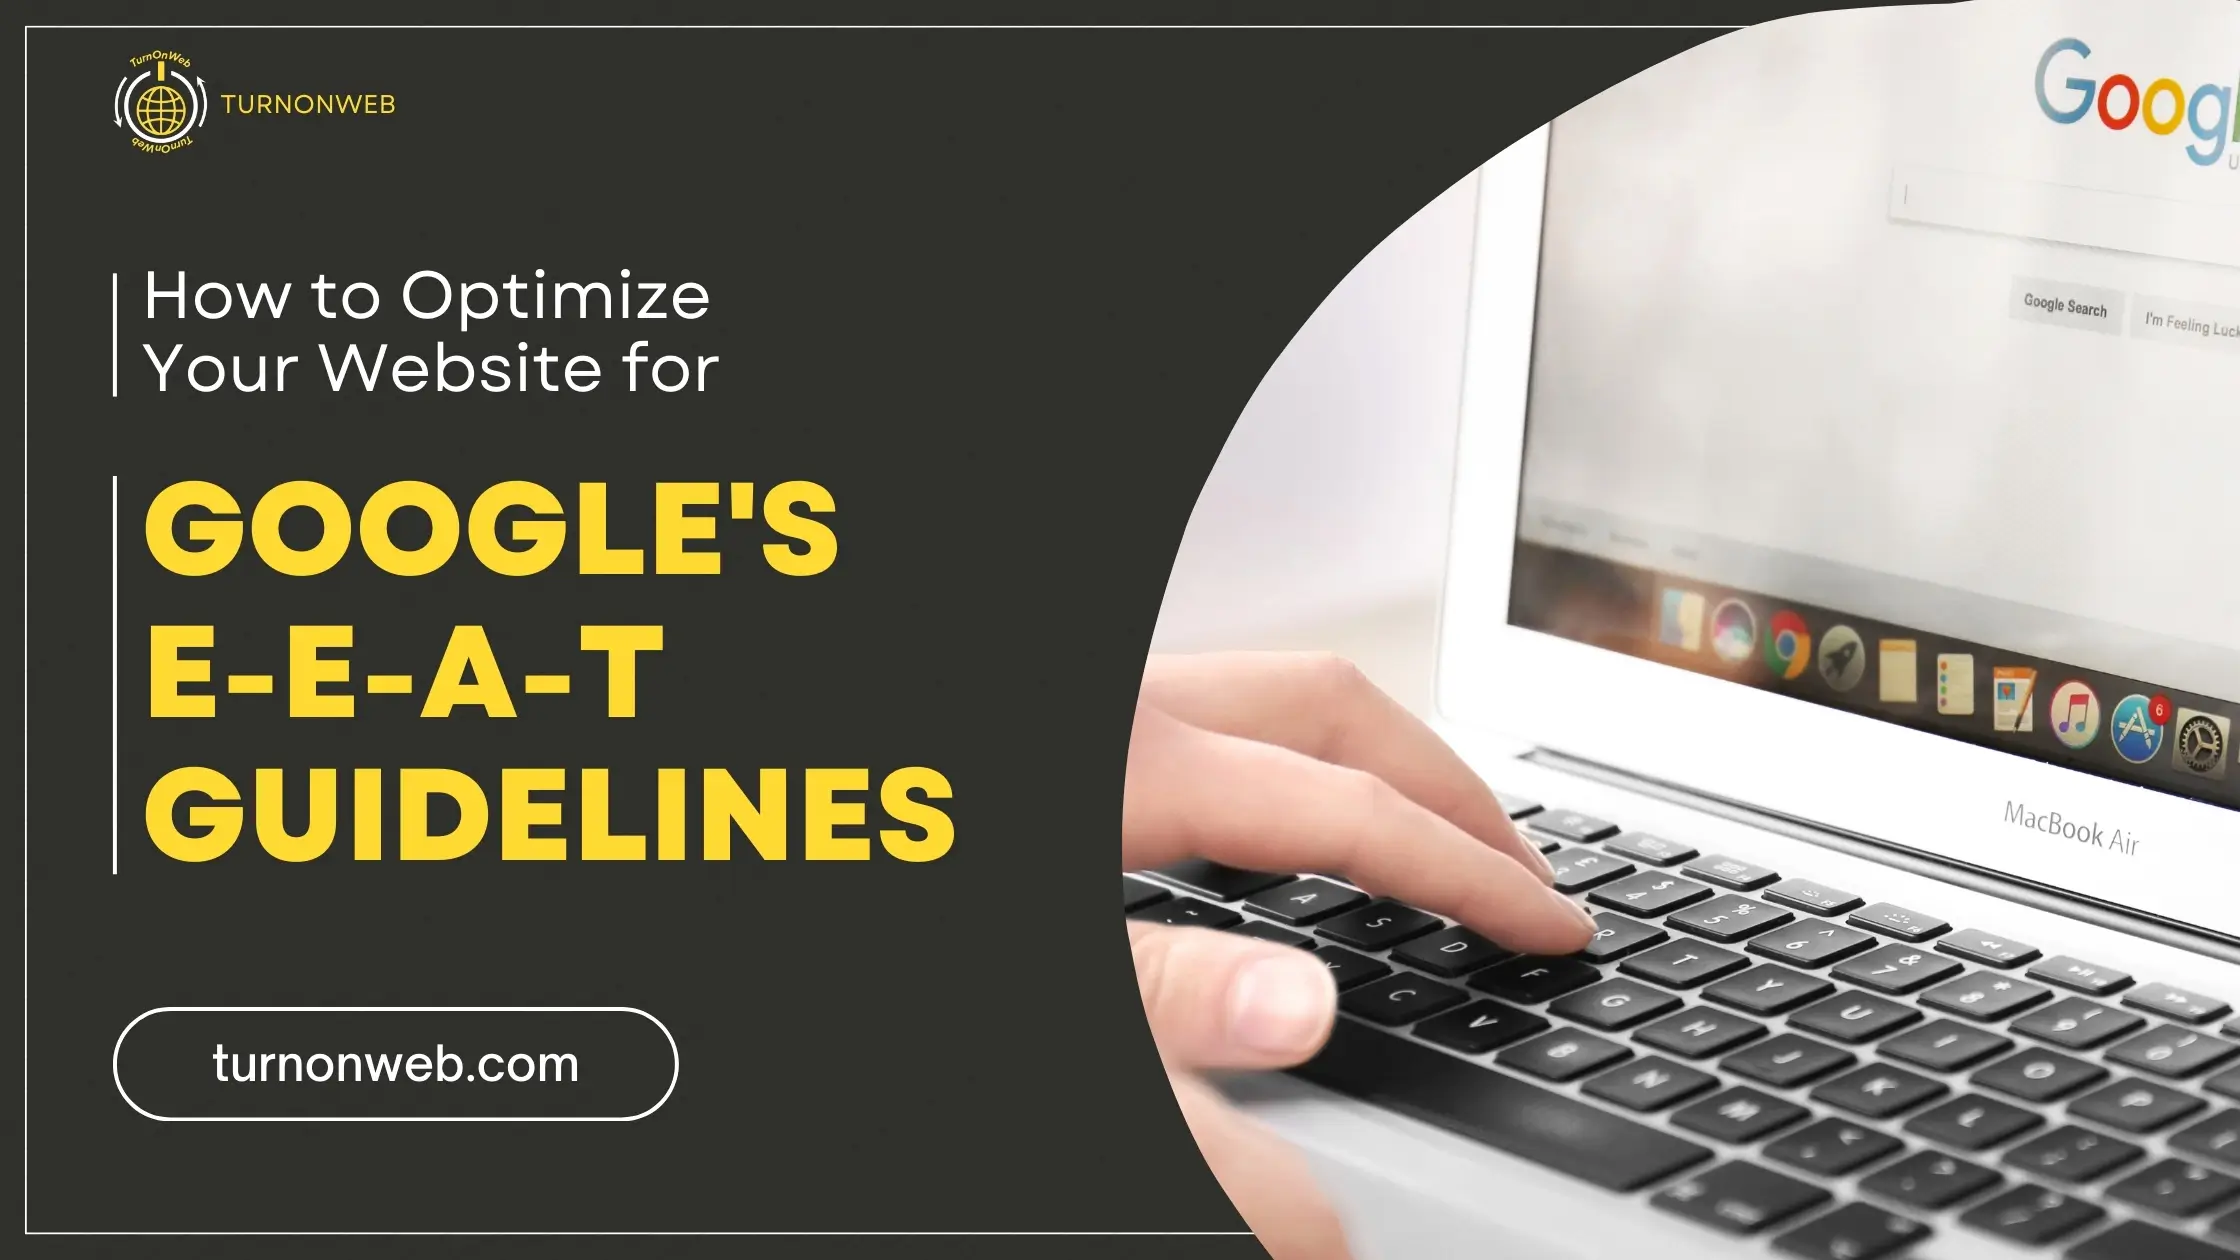 How to Optimize Your Website for Google’s EEAT Guidelines